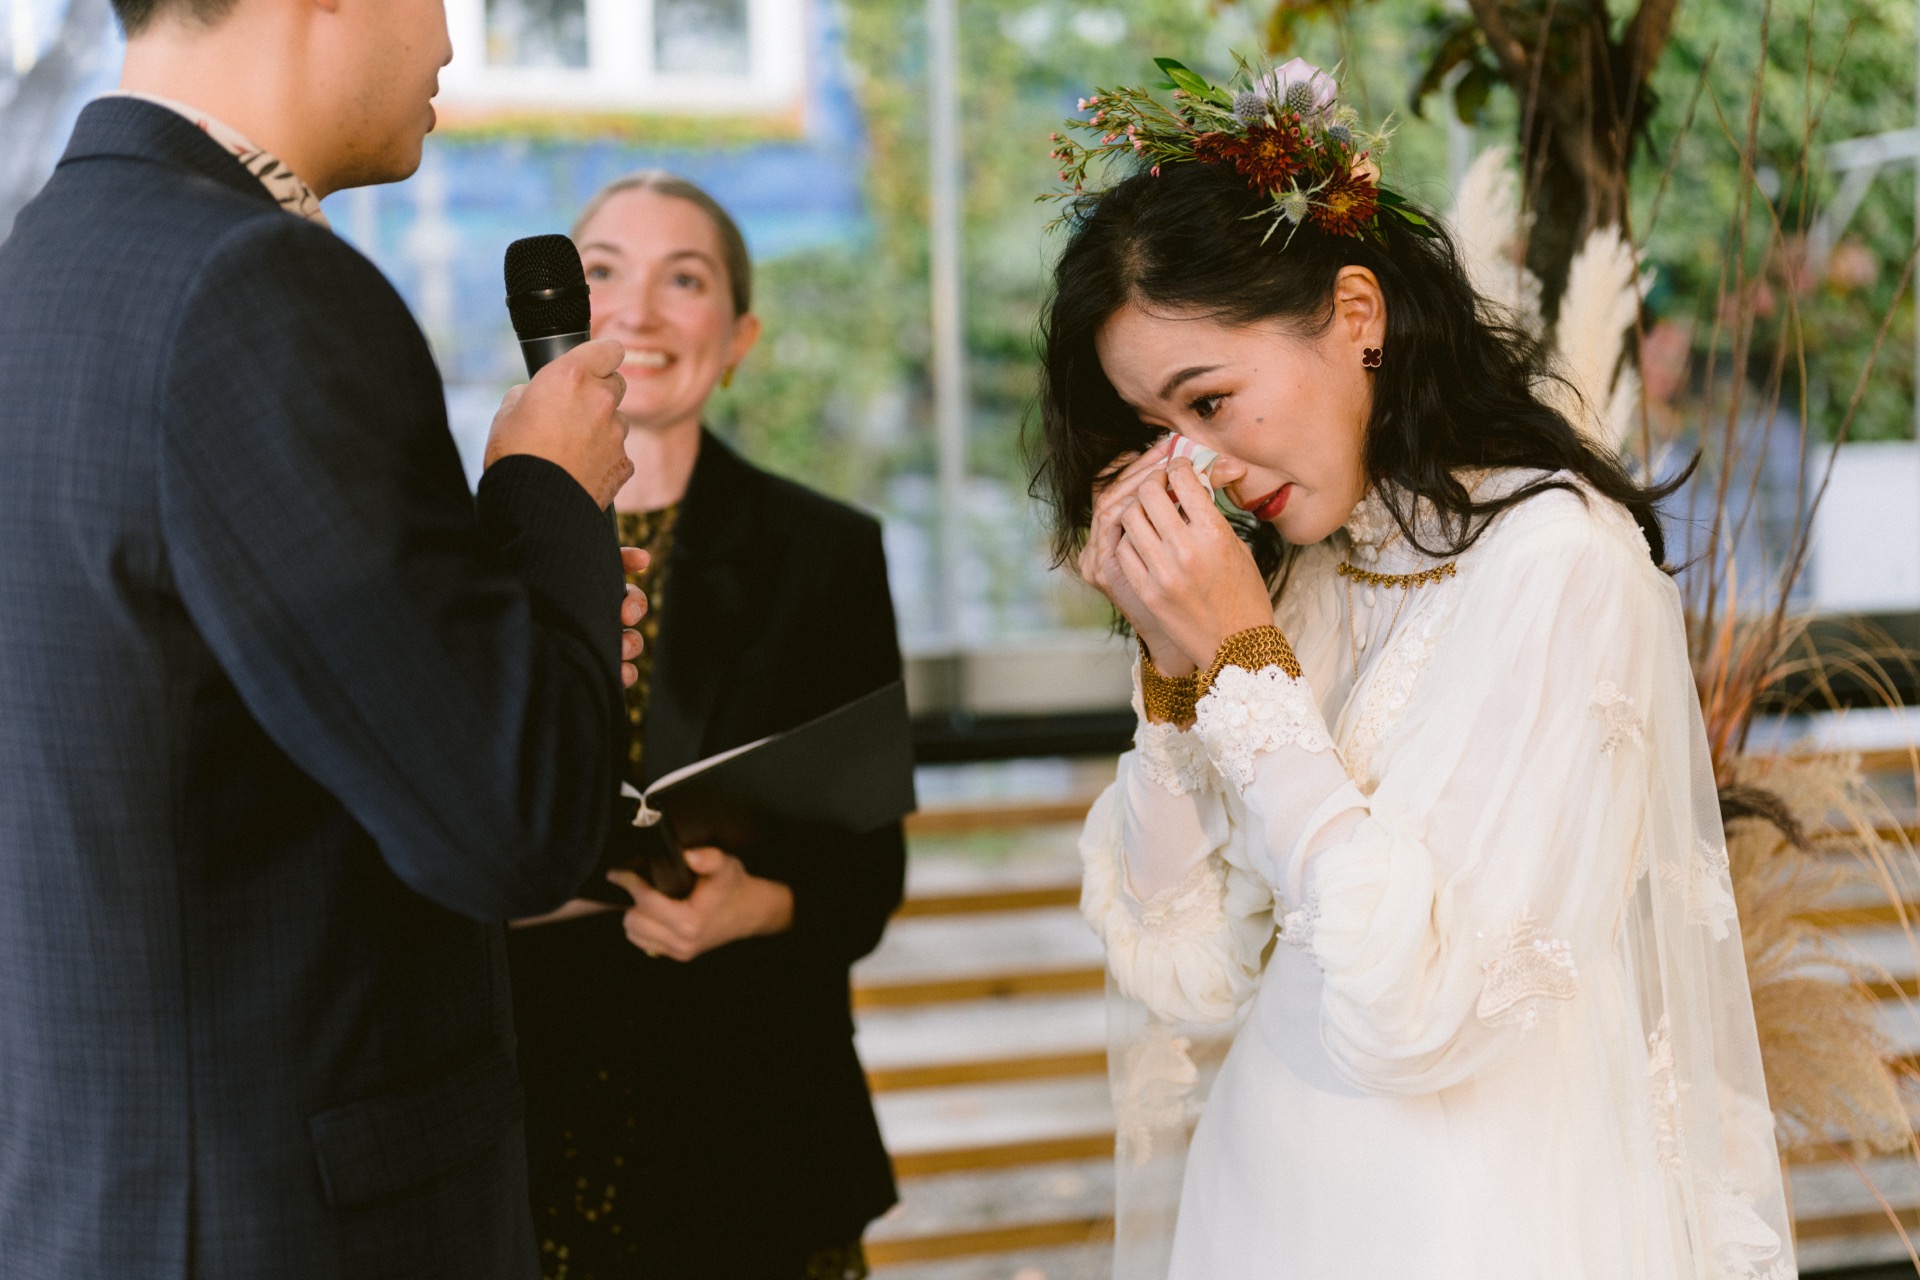 A bride wipes away tears during a wedding ceremony as the groom speaks and an officiant looks on